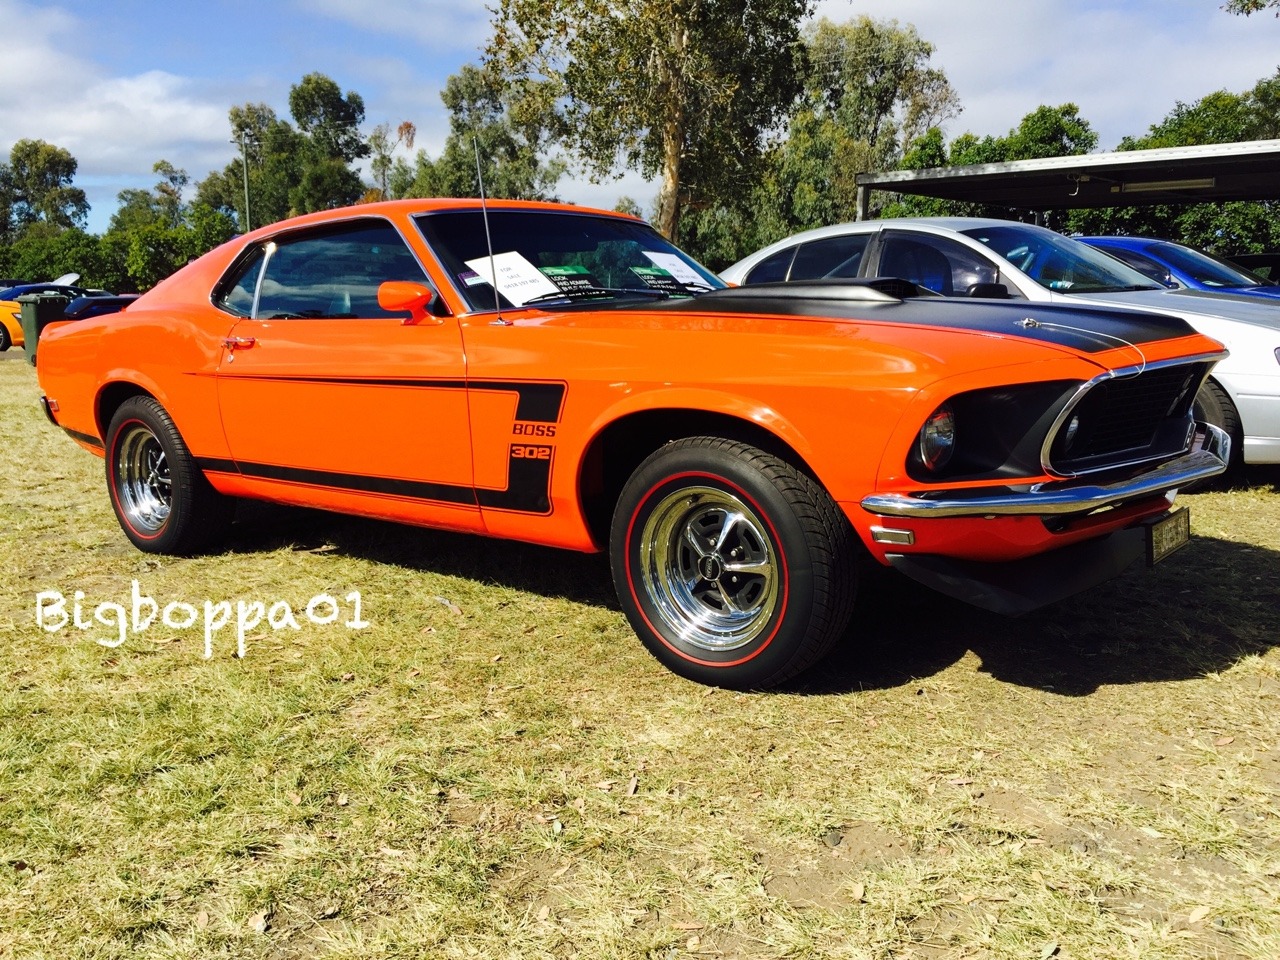 bigboppa01:  Stunning 1969 Boss 302 Mustang at the all ford day at Willowbank raceway.